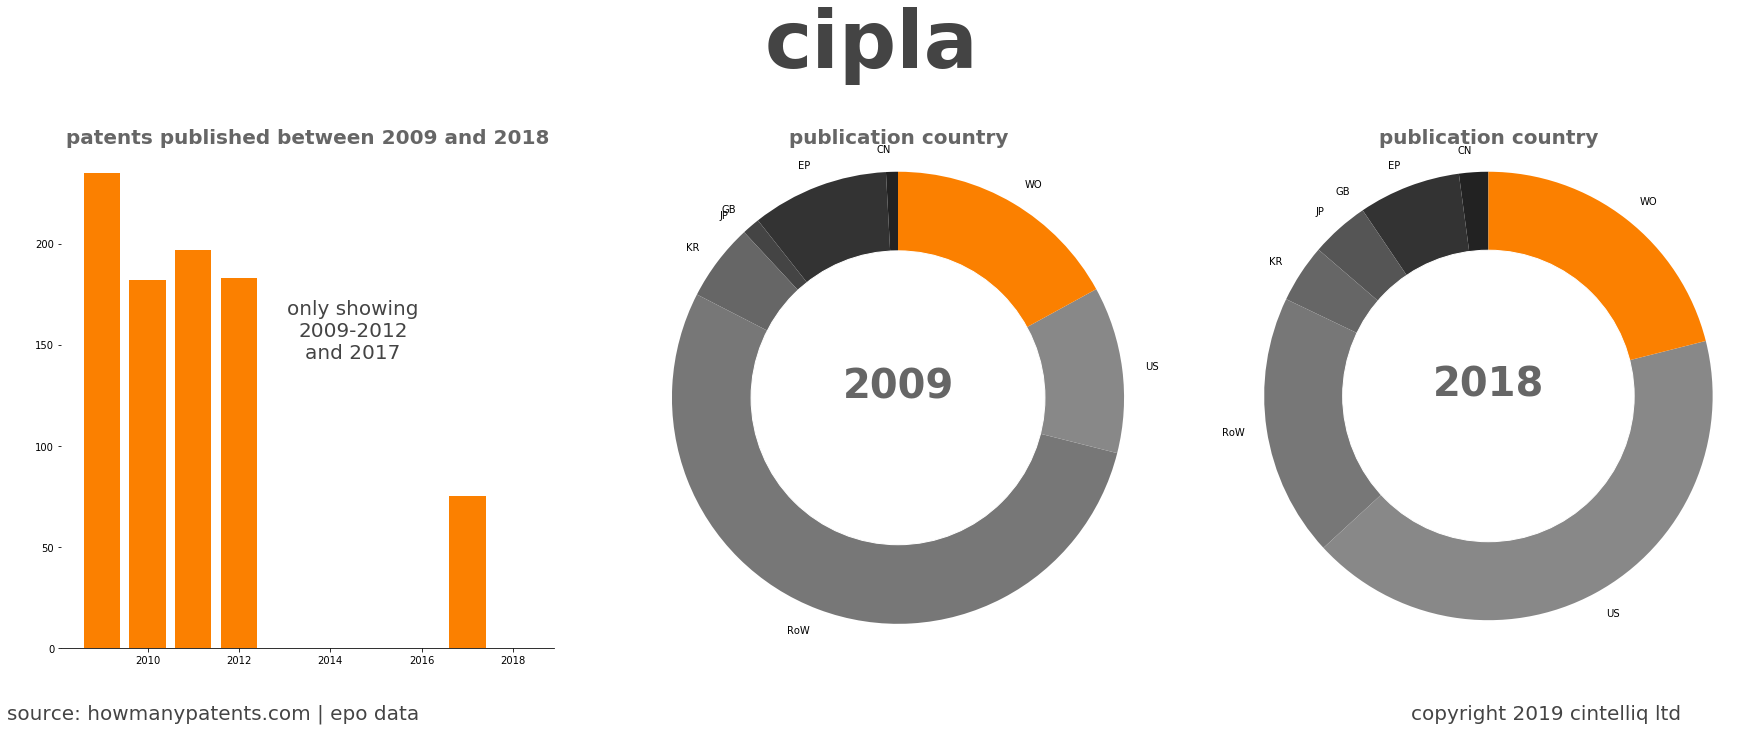 summary of patents for Cipla